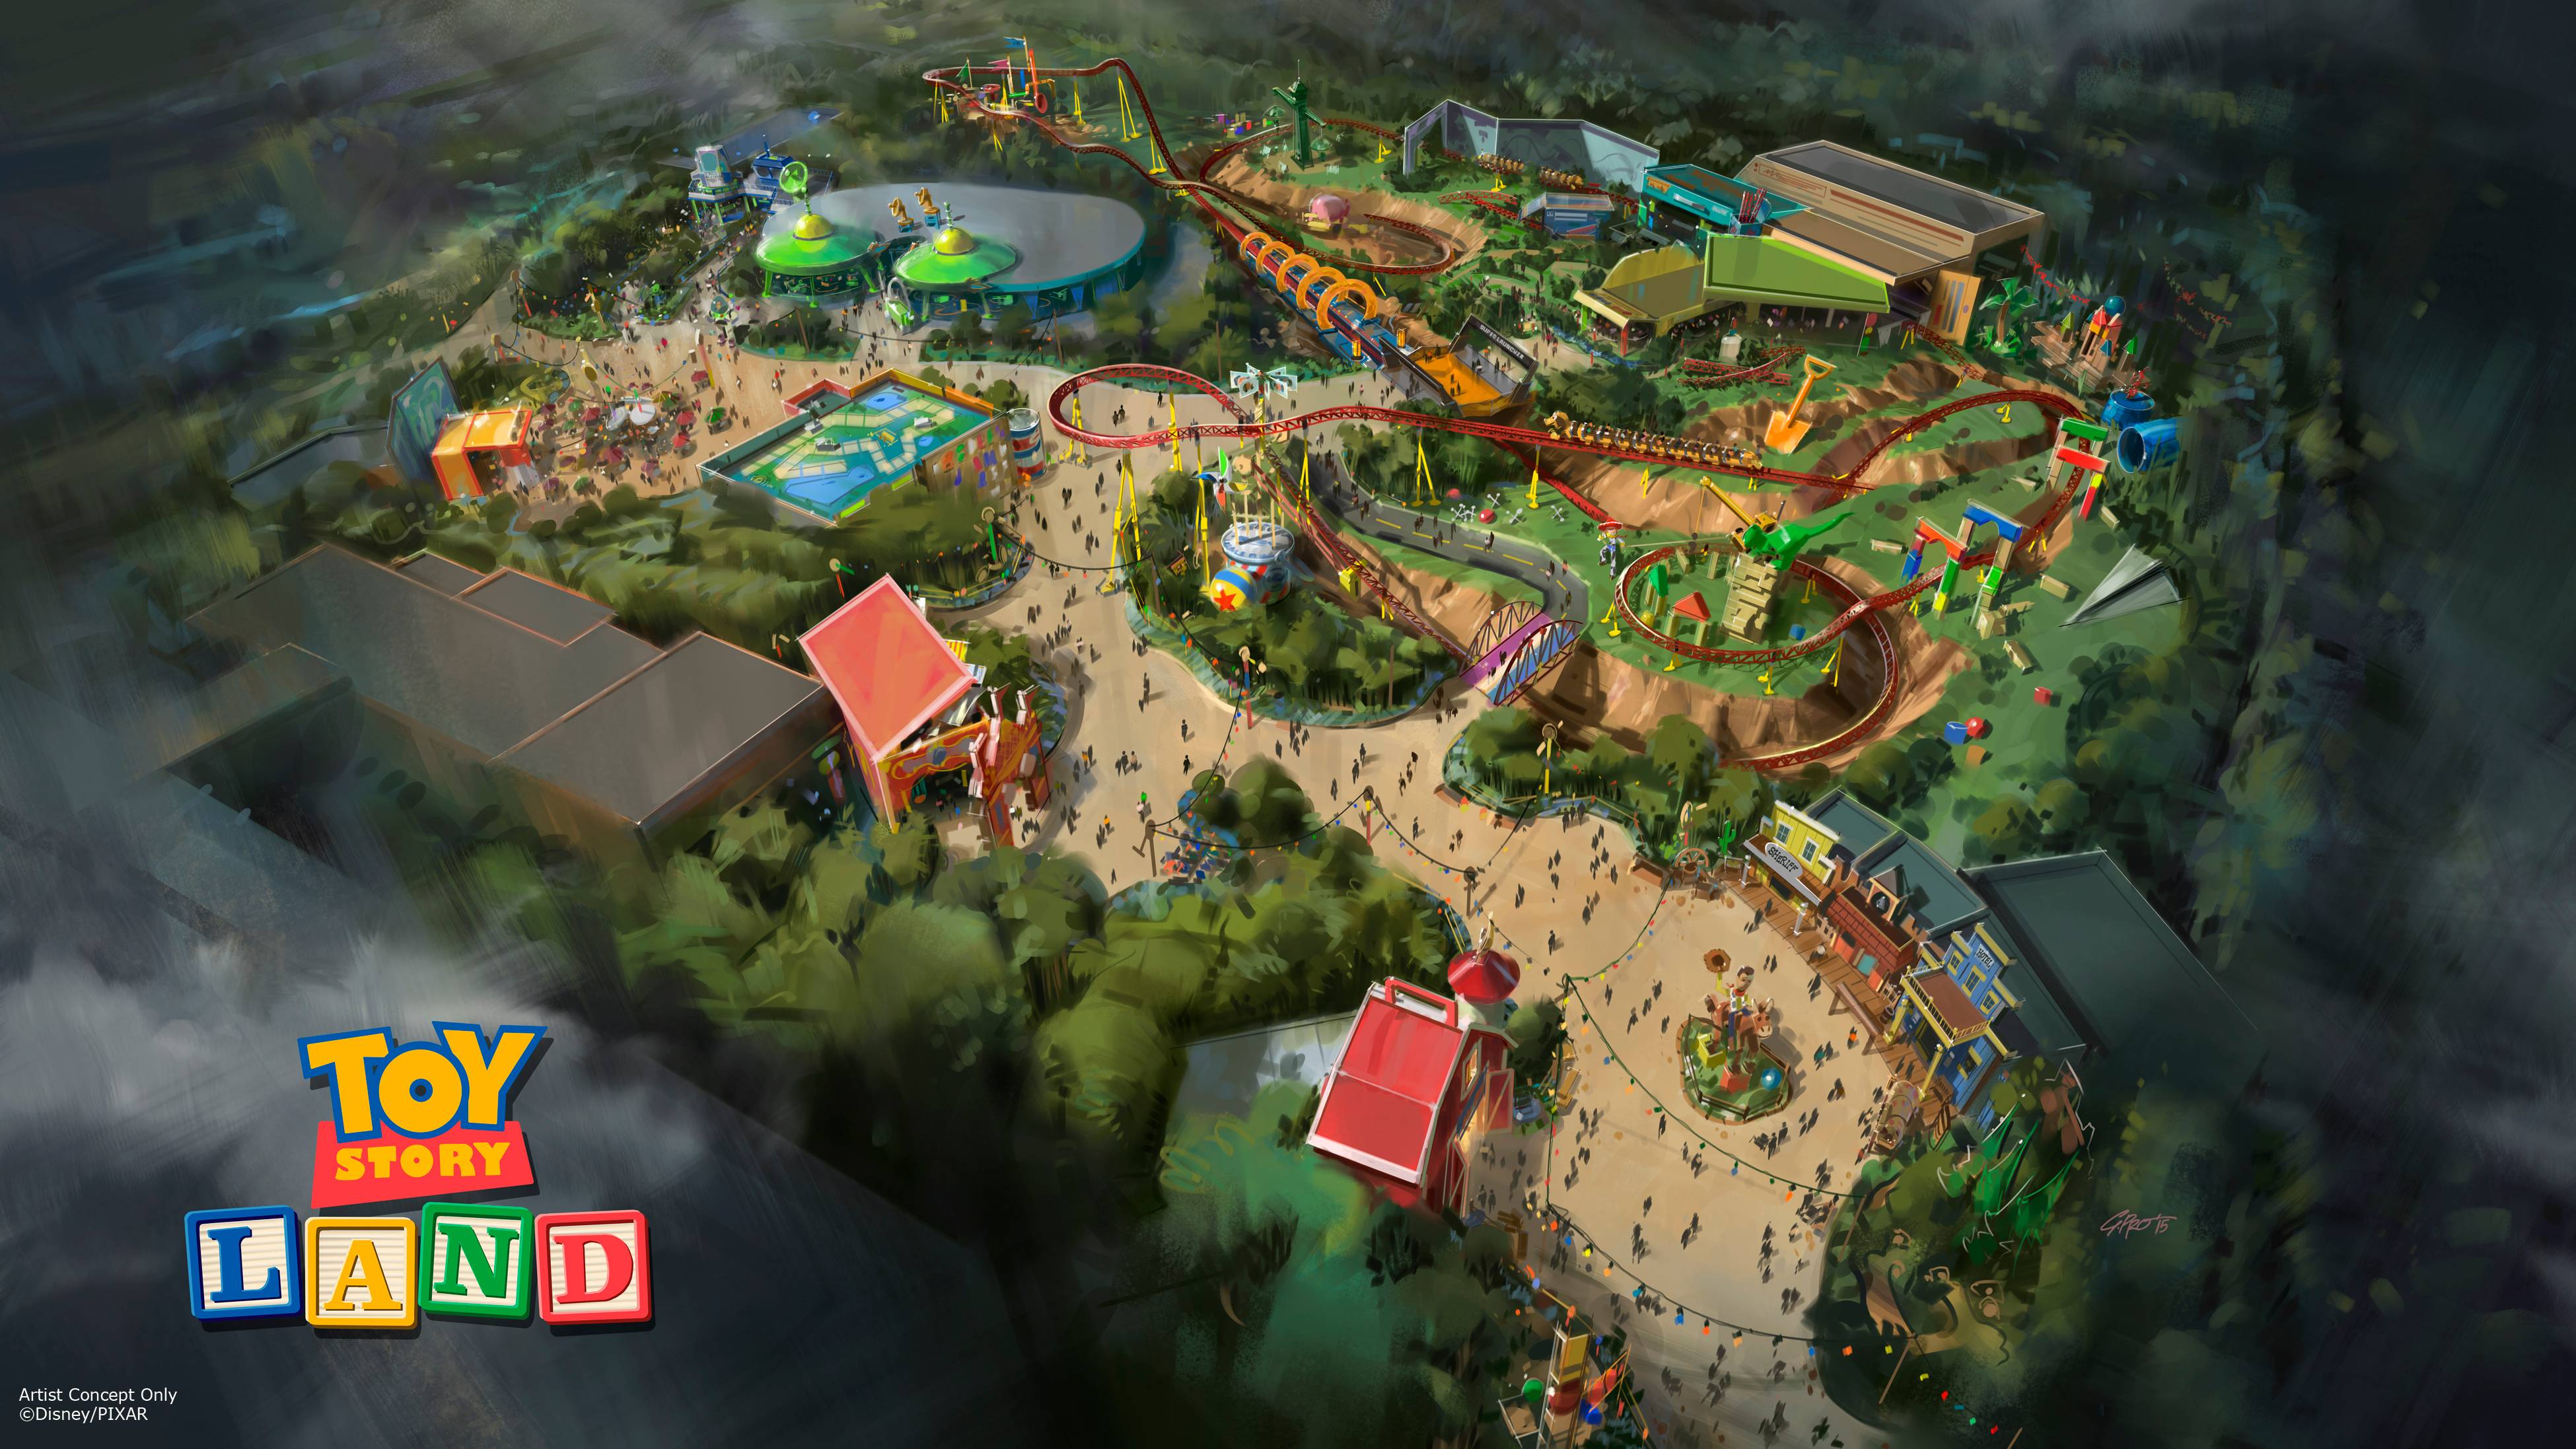 PHOTO - New concept art of Alien Swirling Saucers coming to Toy Story Land this summer